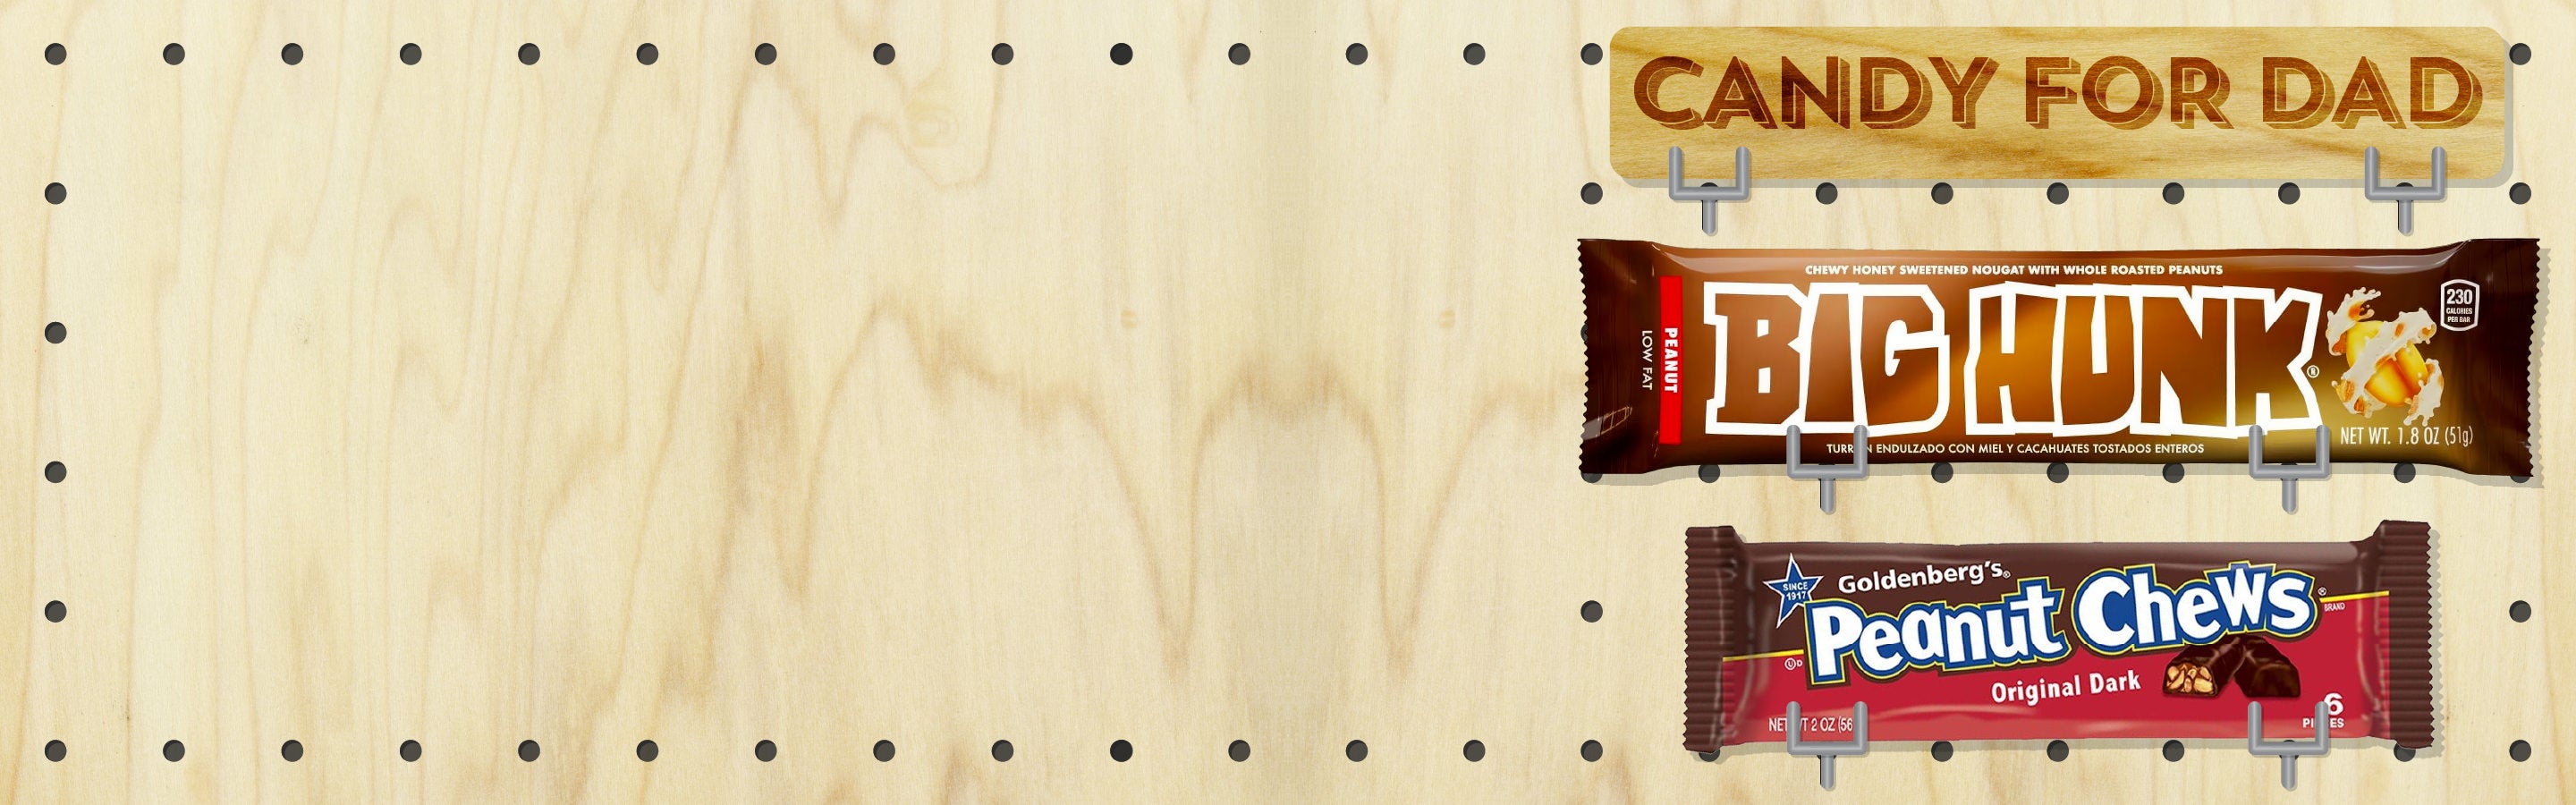 Father's Day Promo Graphic. A wood pegboard holding candy.